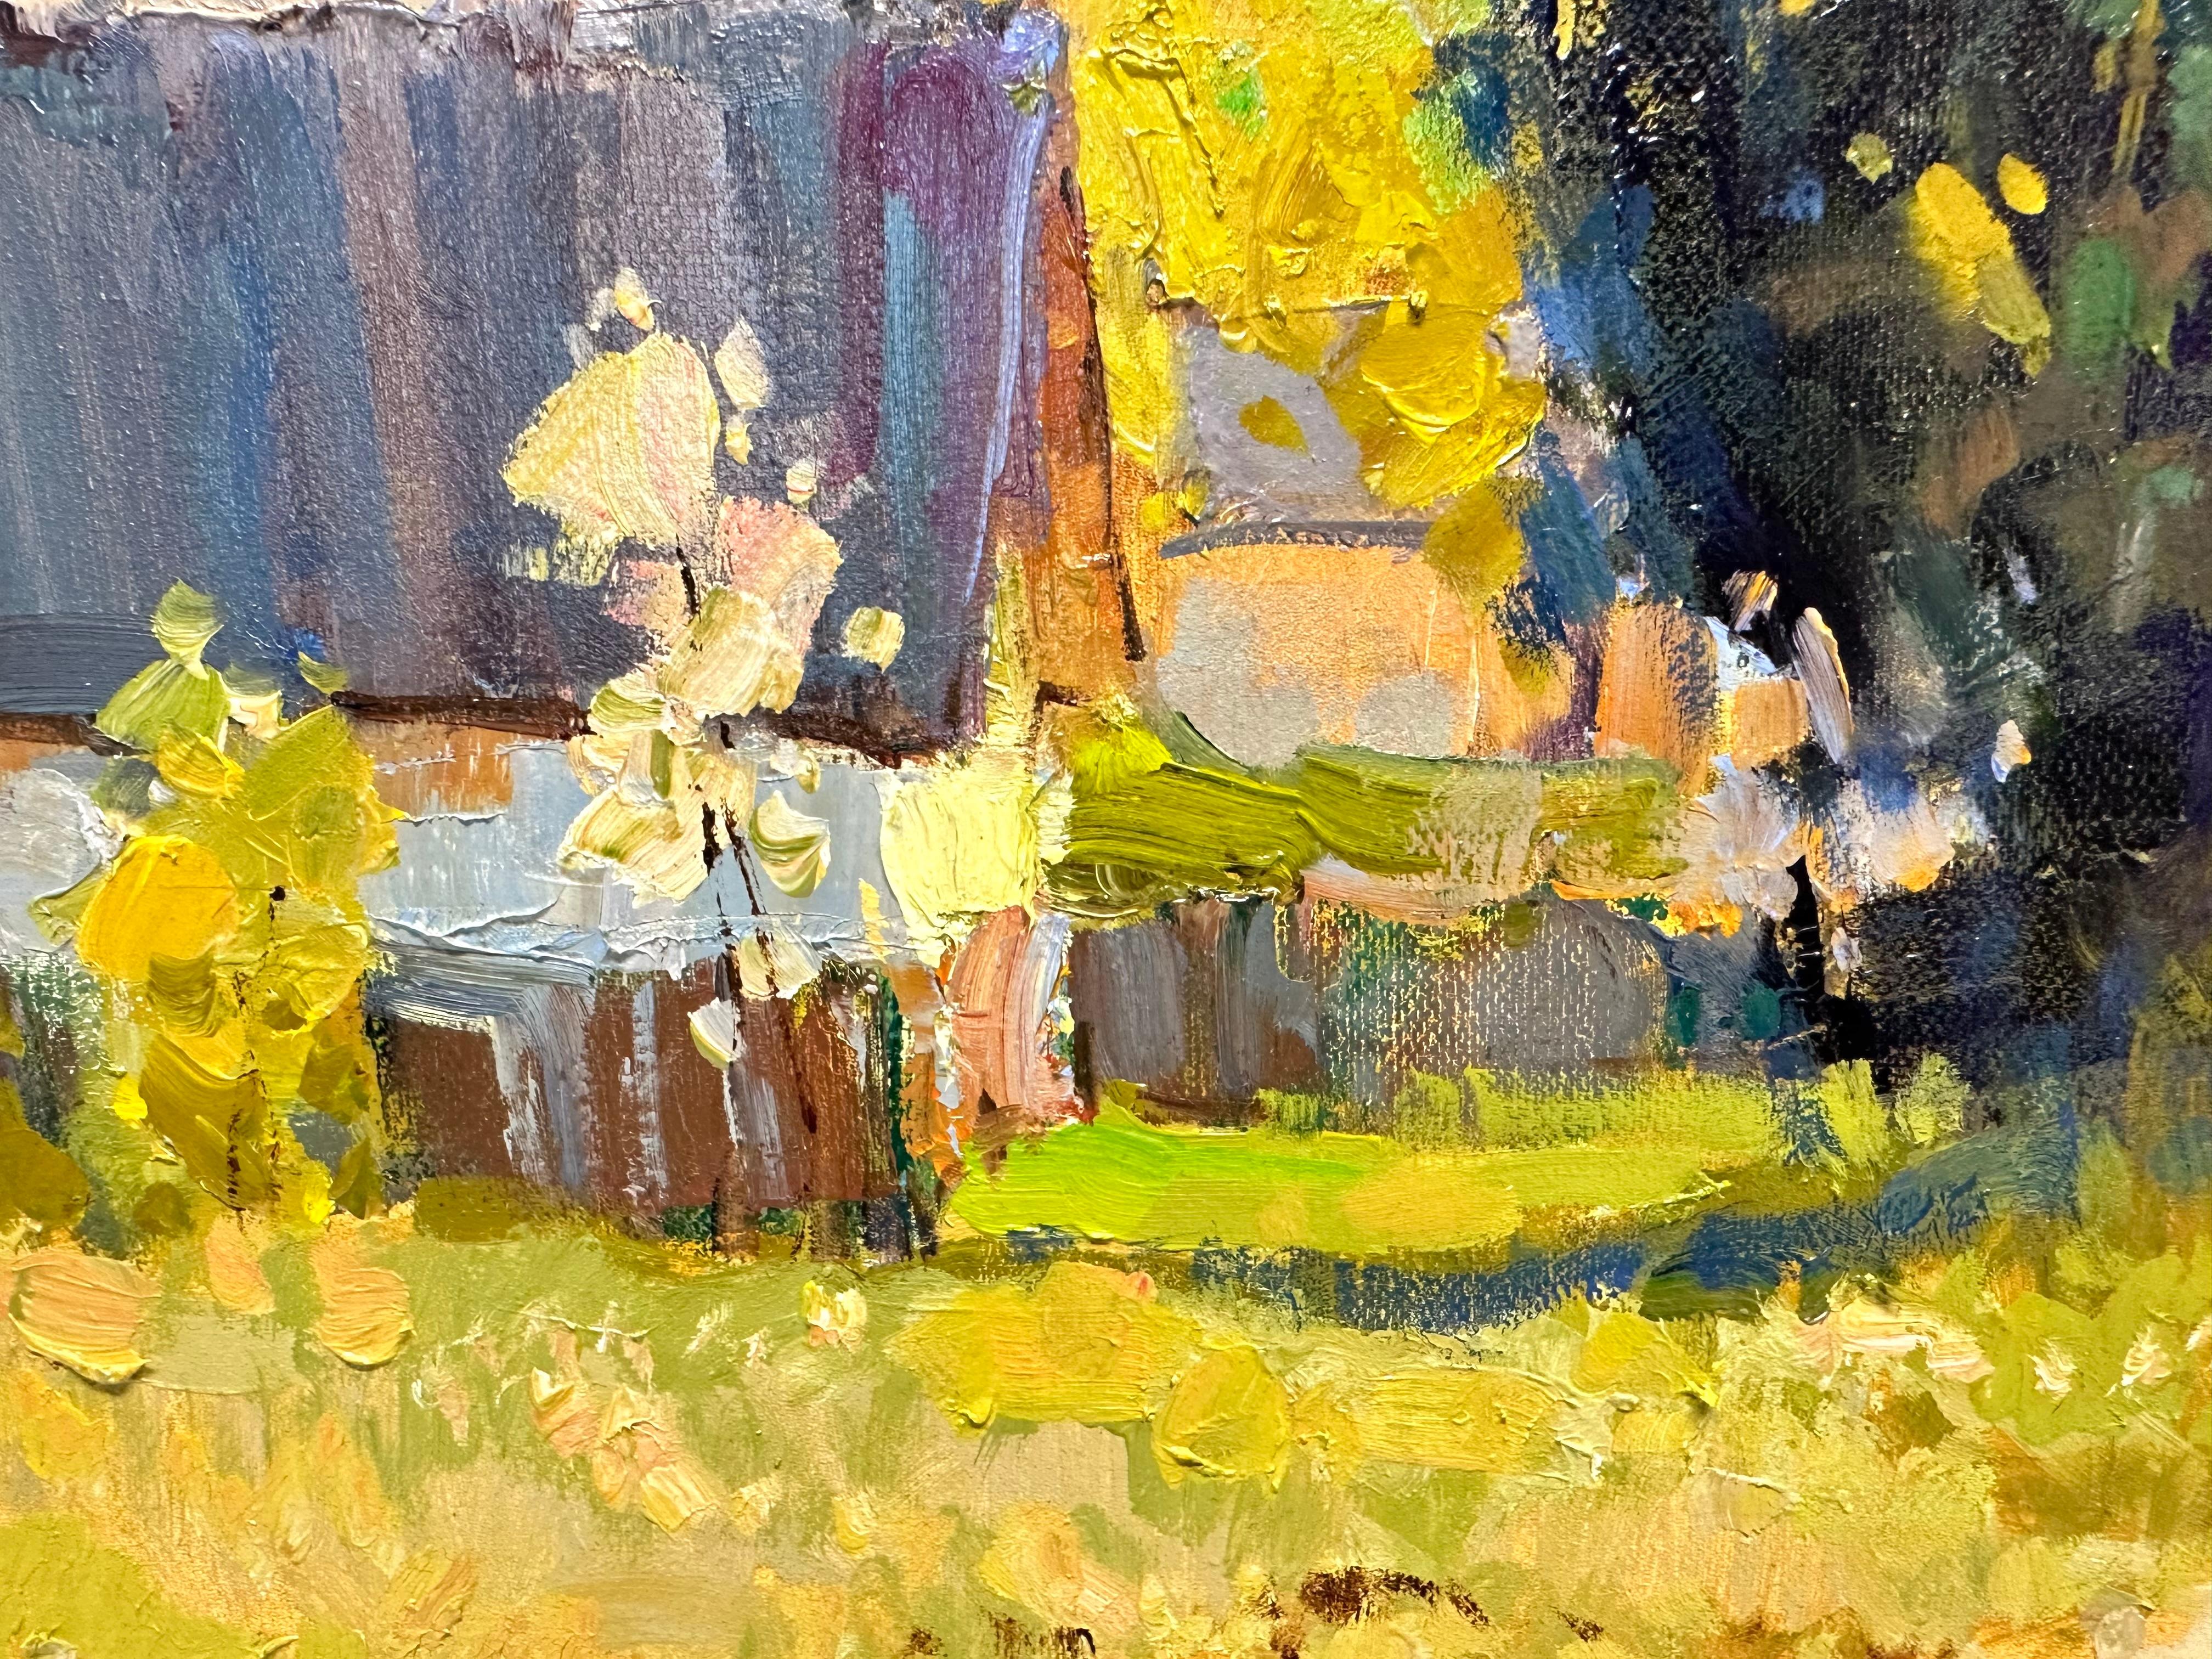 Summer Morning Original Village Sunny Landscape Oil Painting by Andrei Belaichuk For Sale 1